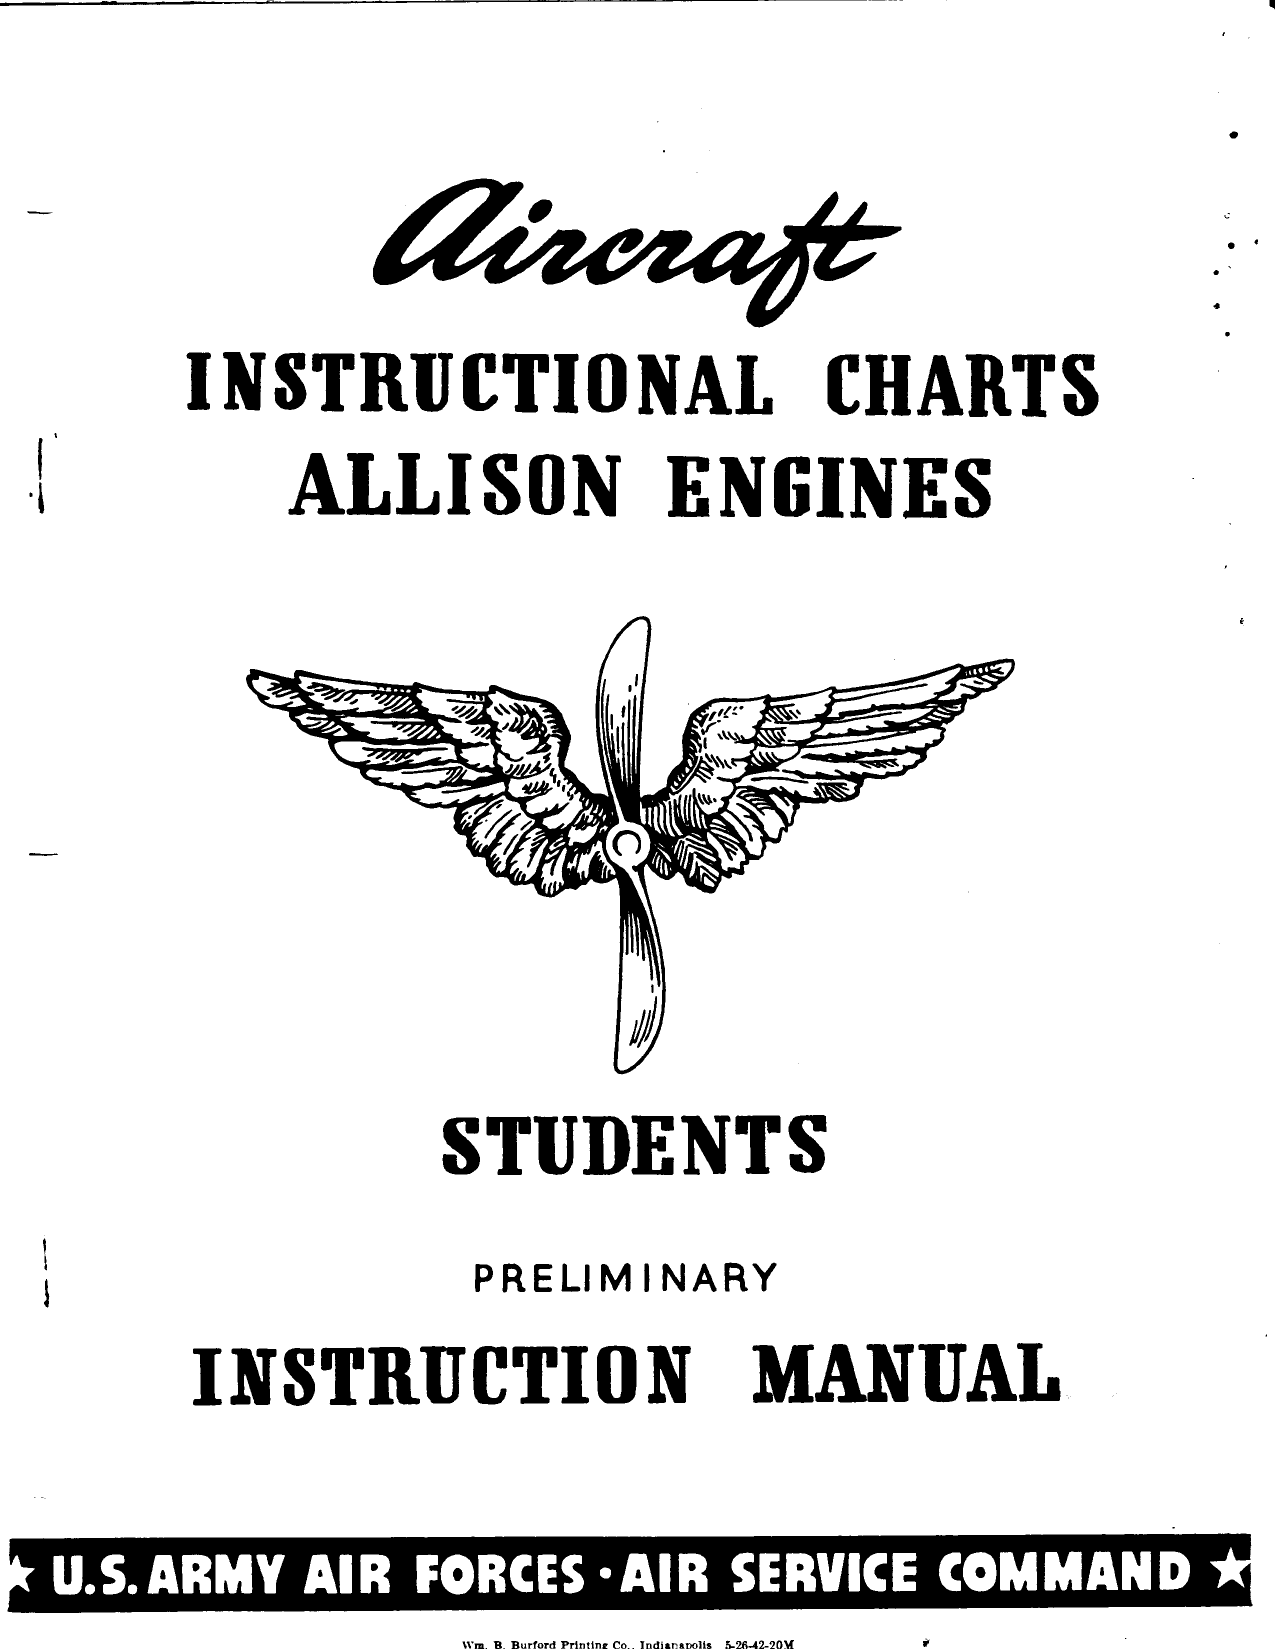 Sample page 1 from AirCorps Library document: Student Instructional Charts - Allison Engine